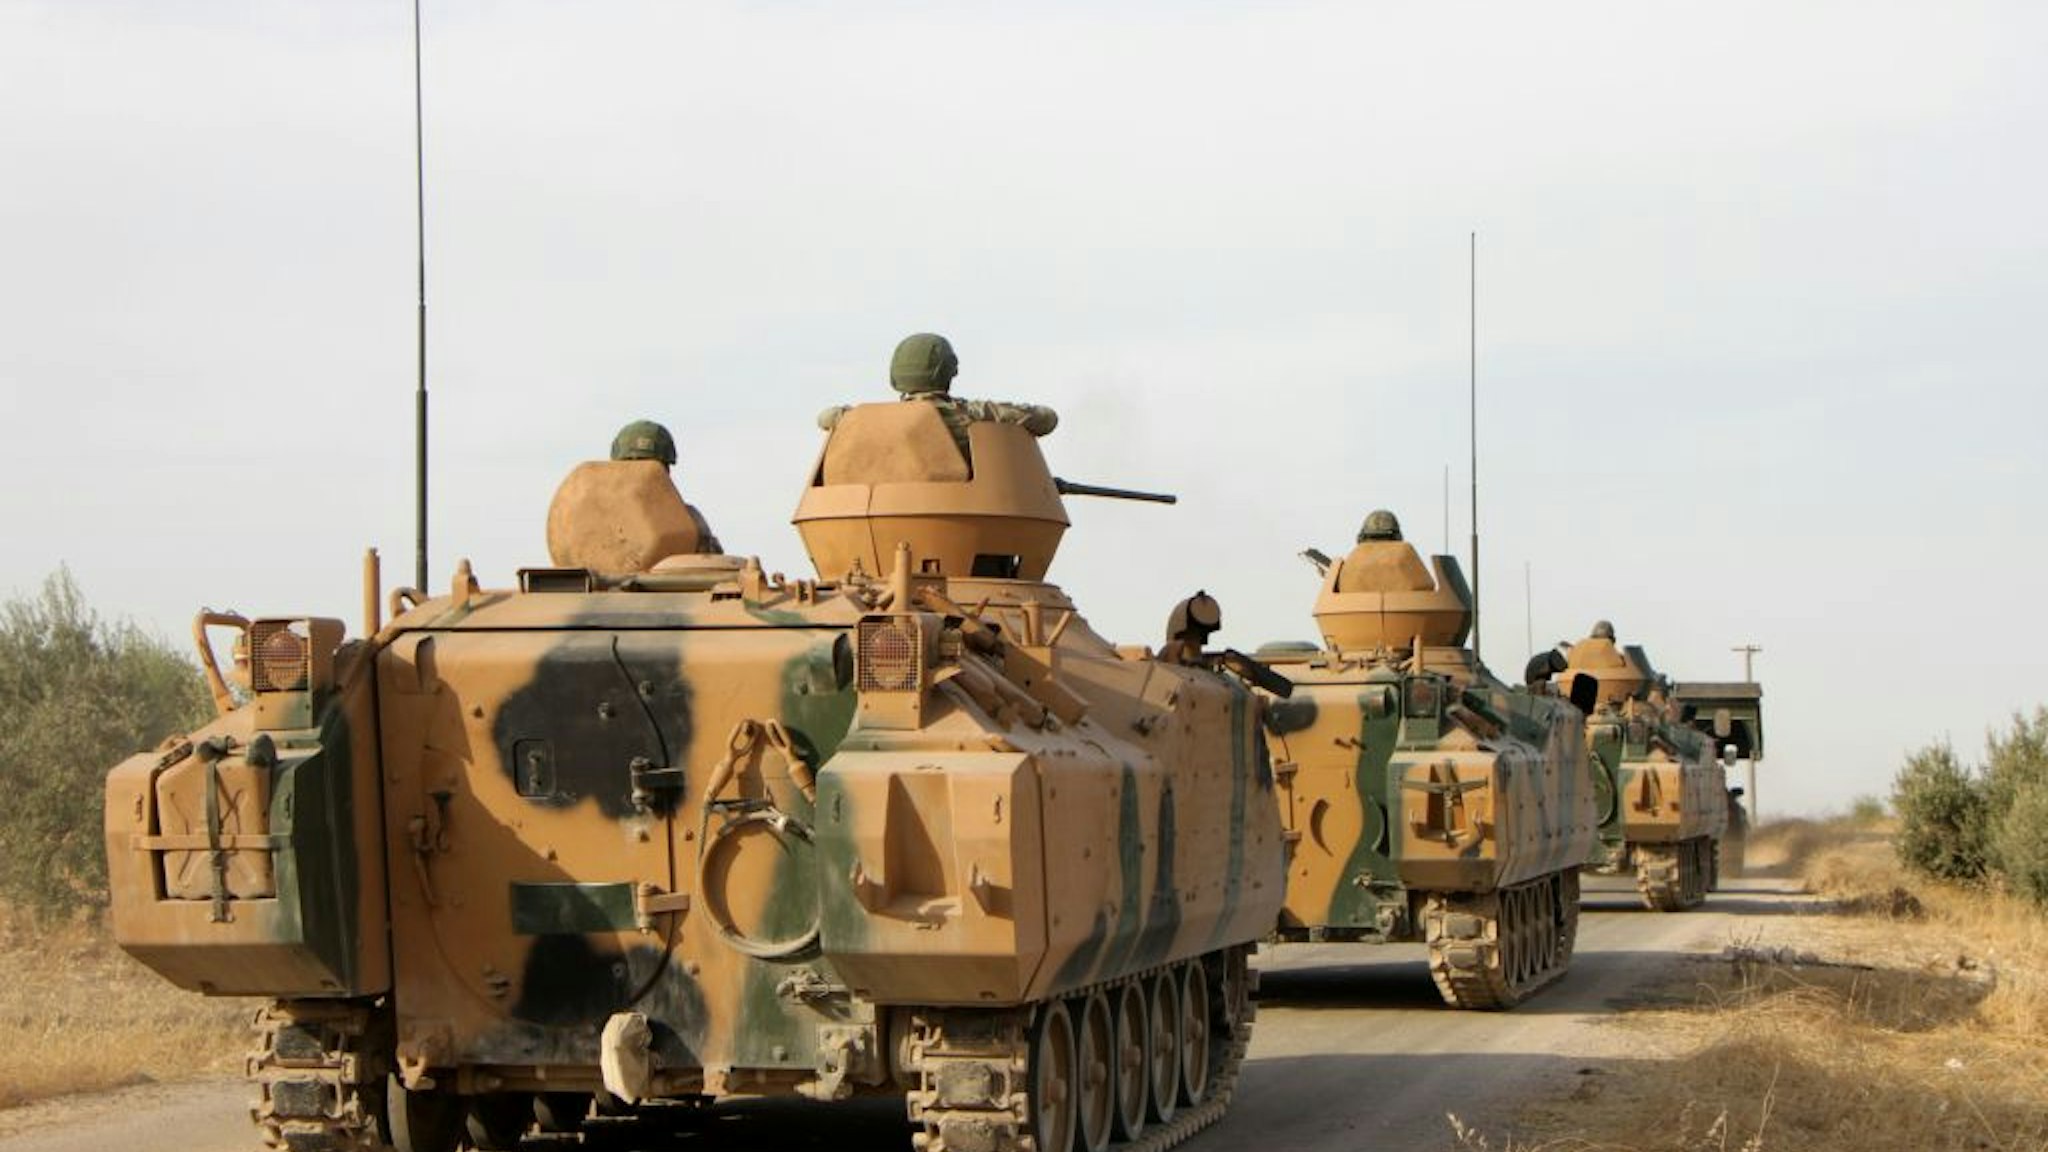 Turkish soldiers are trasported in armoured personnel carriers through the town of Tukhar, north of Syria's northern city of Manbij, on October 14, 2019, as Turkey and it's allies continues their assault on Kurdish-held border towns in northeastern Syria. - Turkey wants to create a roughly 30-kilometre (20-mile) buffer zone along its border to keep Kurdish forces at bay and also to send back some of the 3.6 million Syrian refugees it hosts.